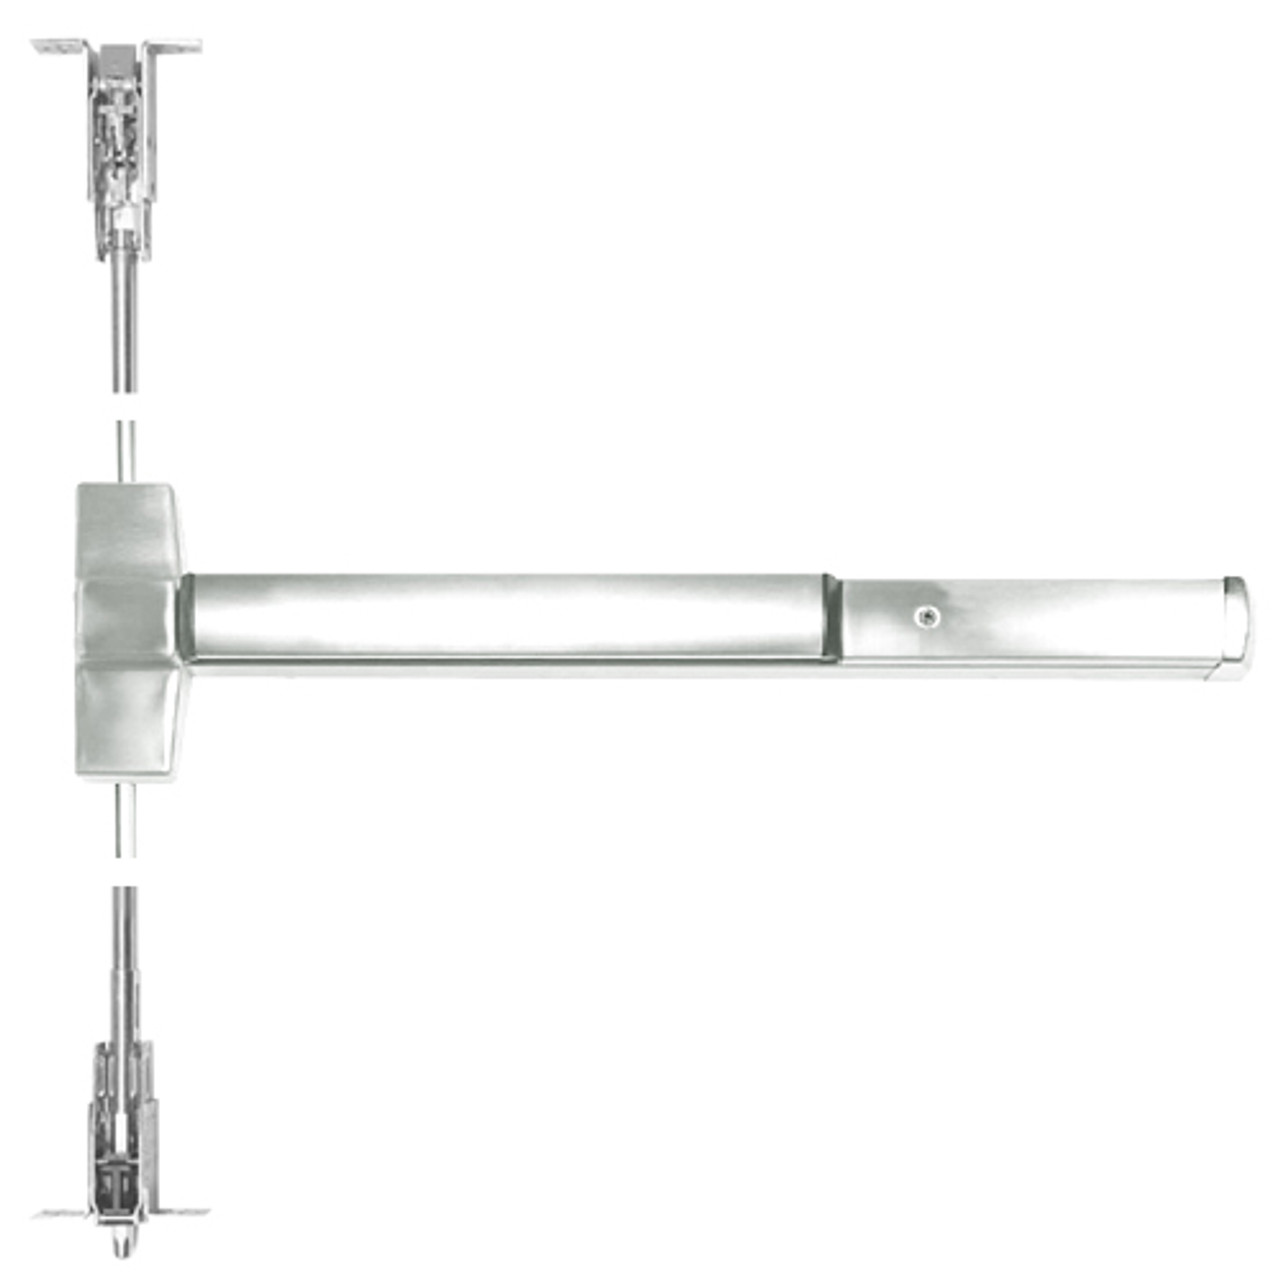 ED5800-618-W048-MELR-M92 Corbin ED5800 Series Non Fire Rated Concealed Vertical Rod Device with Motor Latch Retraction and Touchbar Monitoring in Bright Nickel Finish